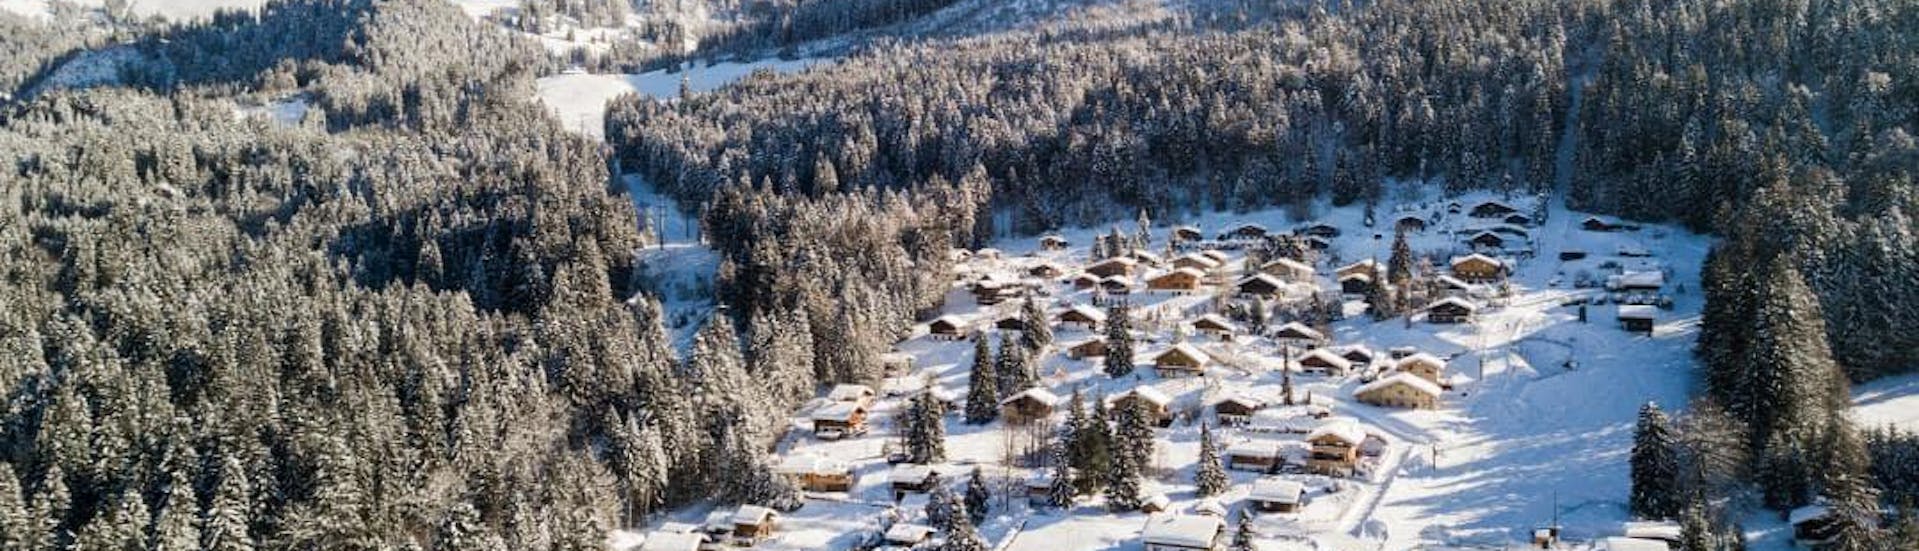 An aereal view of Les Paccots-Châtel Saint Denis, a popular destination in the French part of Switzerland where visitors are welcome to book ski lessons at one of the local ski schools.